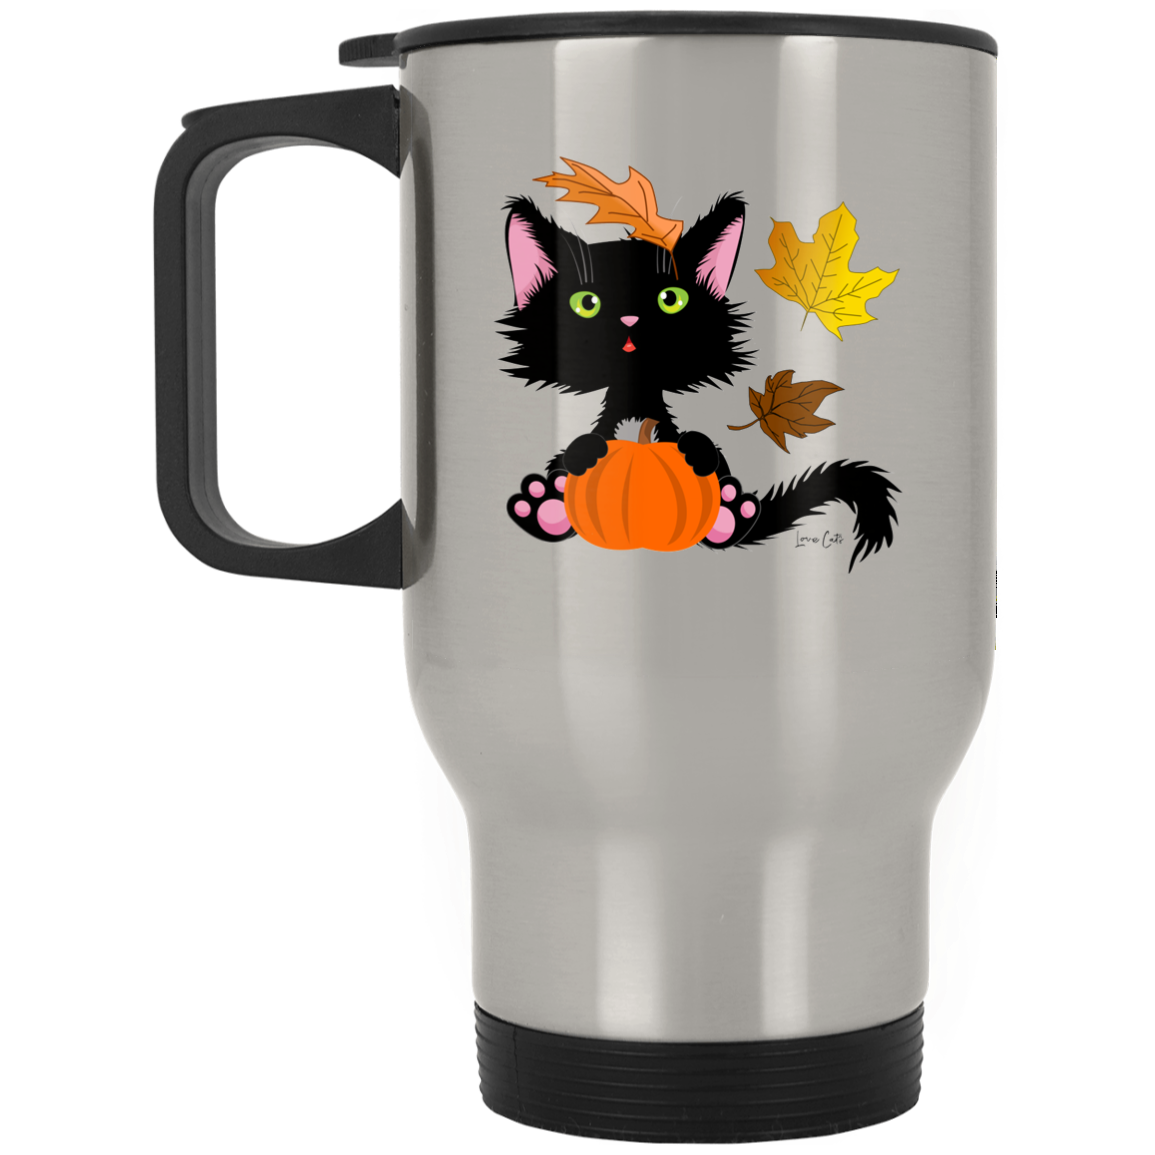 Lucky the Black Cat with Pumpkin - Stainless Steel Travel Mug